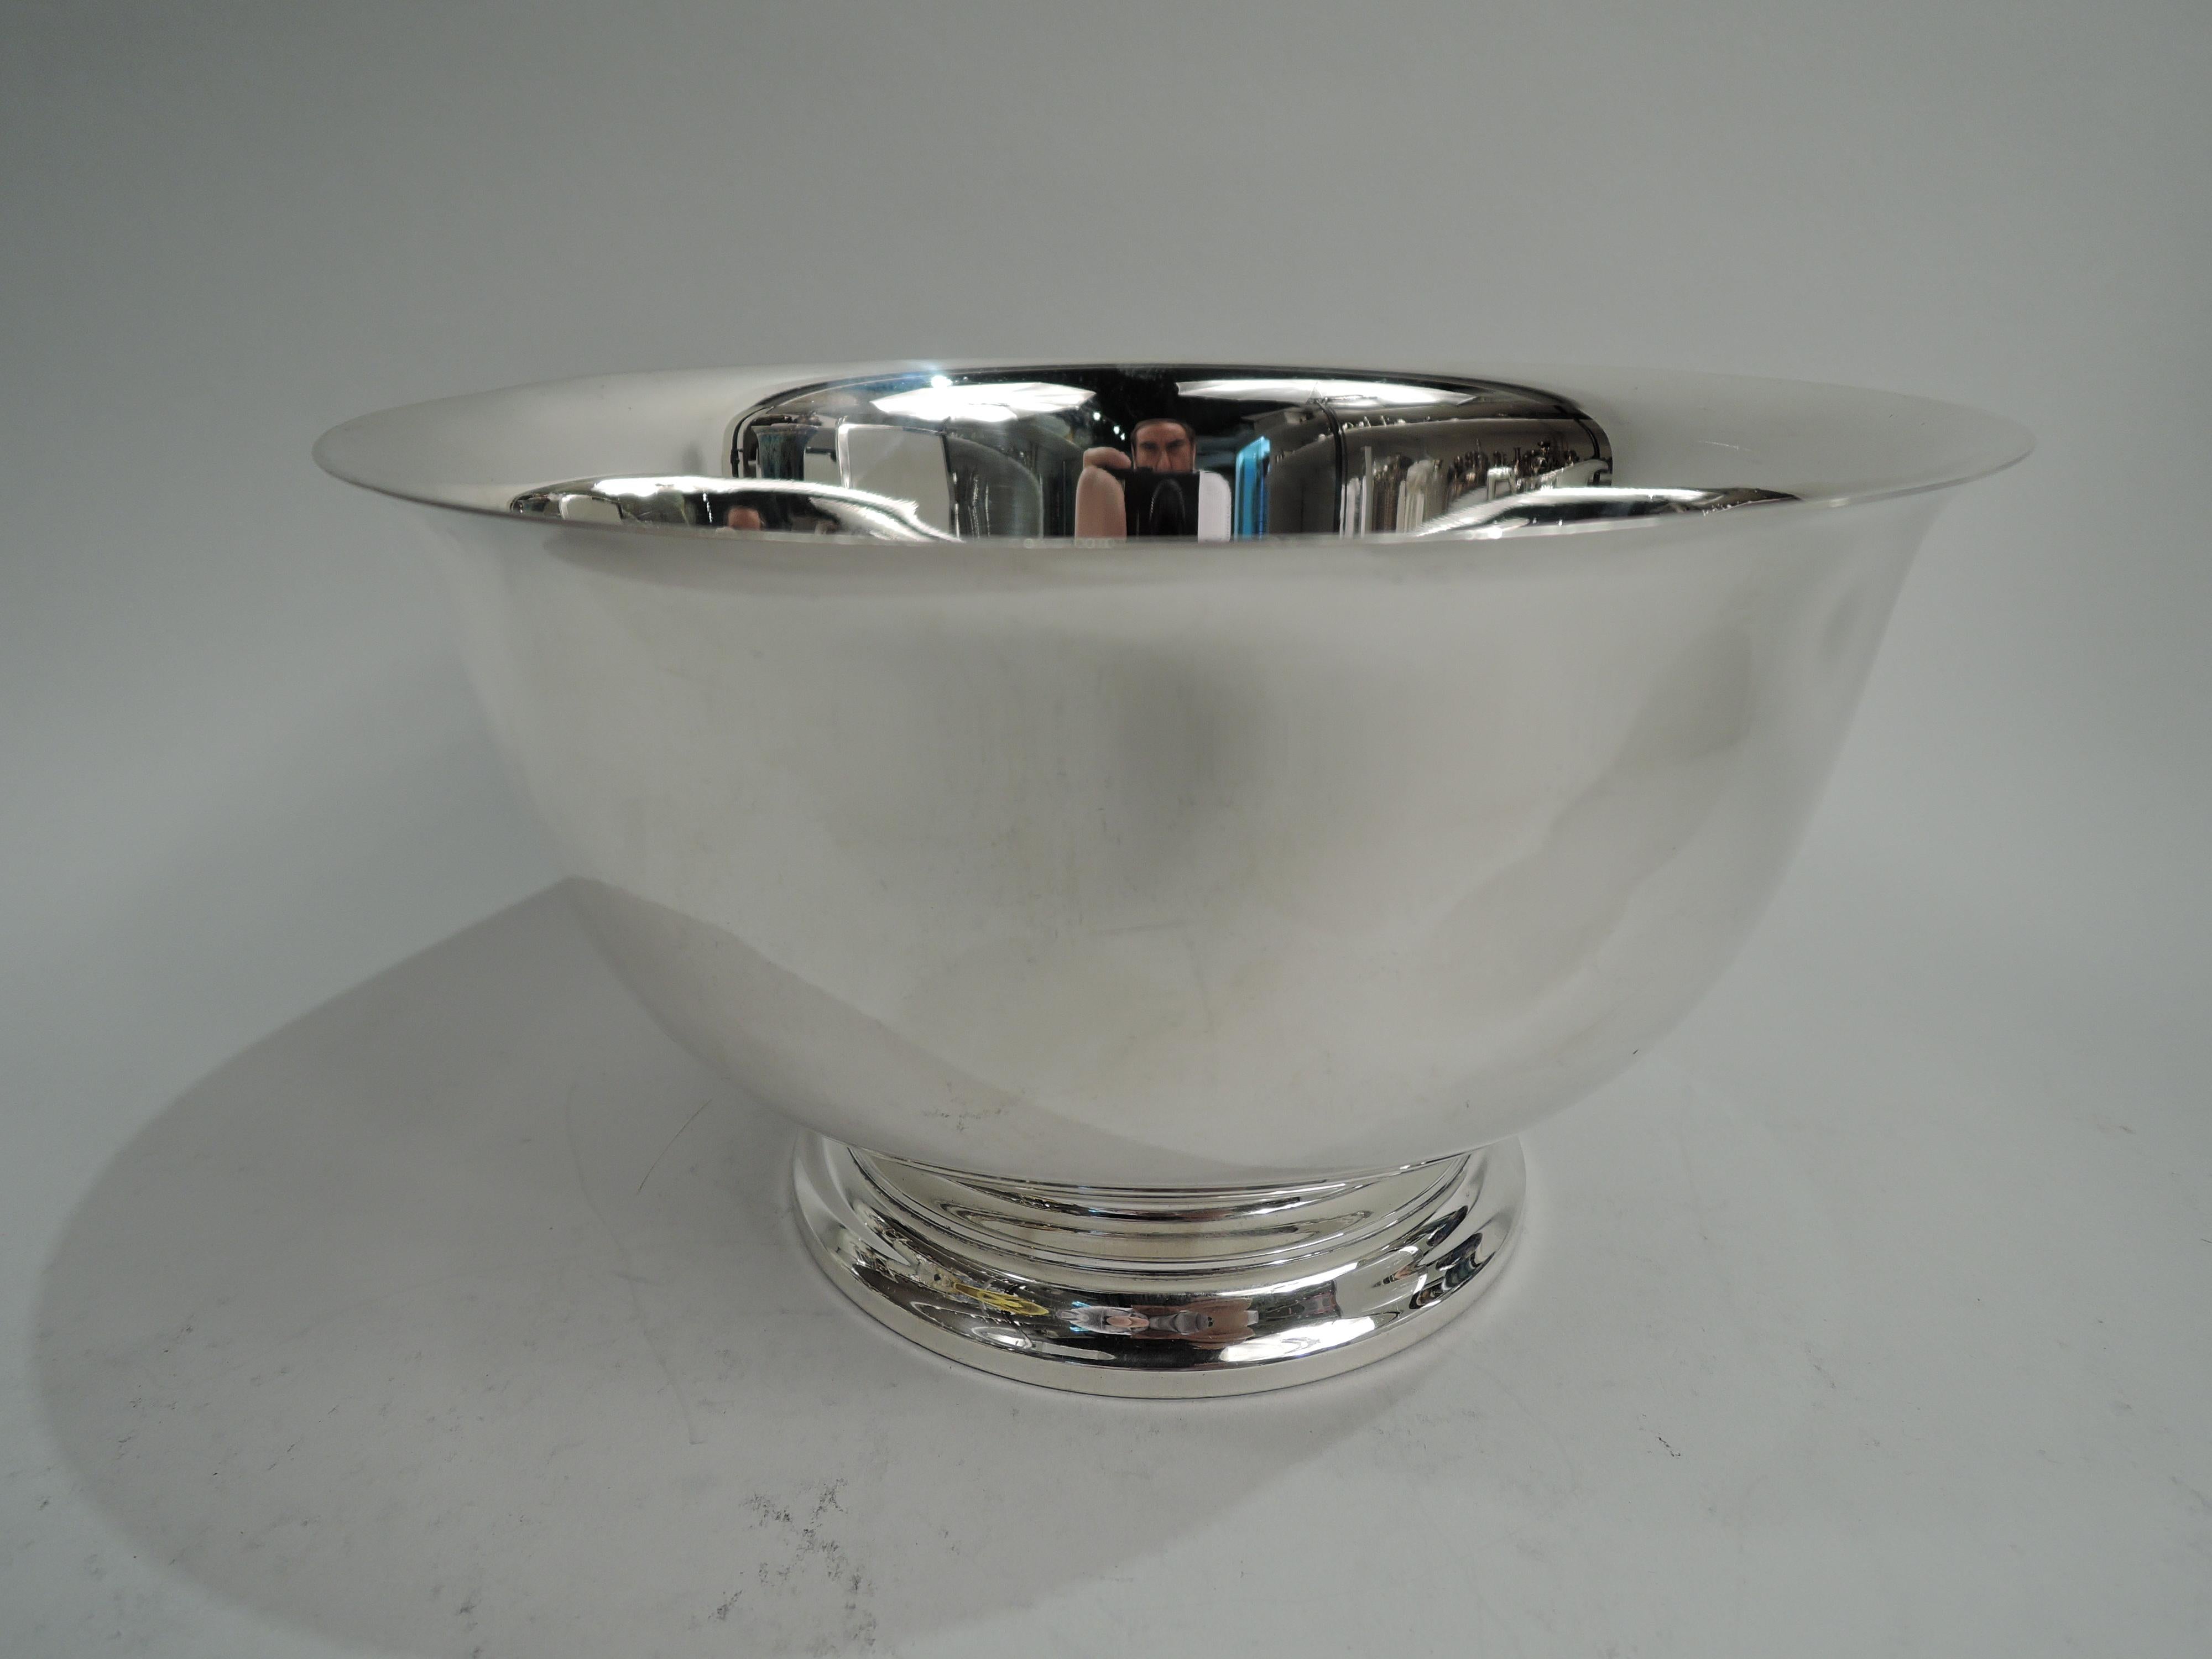 Traditional sterling silver Revere bowl. Made by Gorham in Providence in 1957. Curved sides, flared rim, and stepped foot. A historic form that can suit many modern uses. Fully marked including maker’s stamp, date code, no. 41659, and phrase “P.